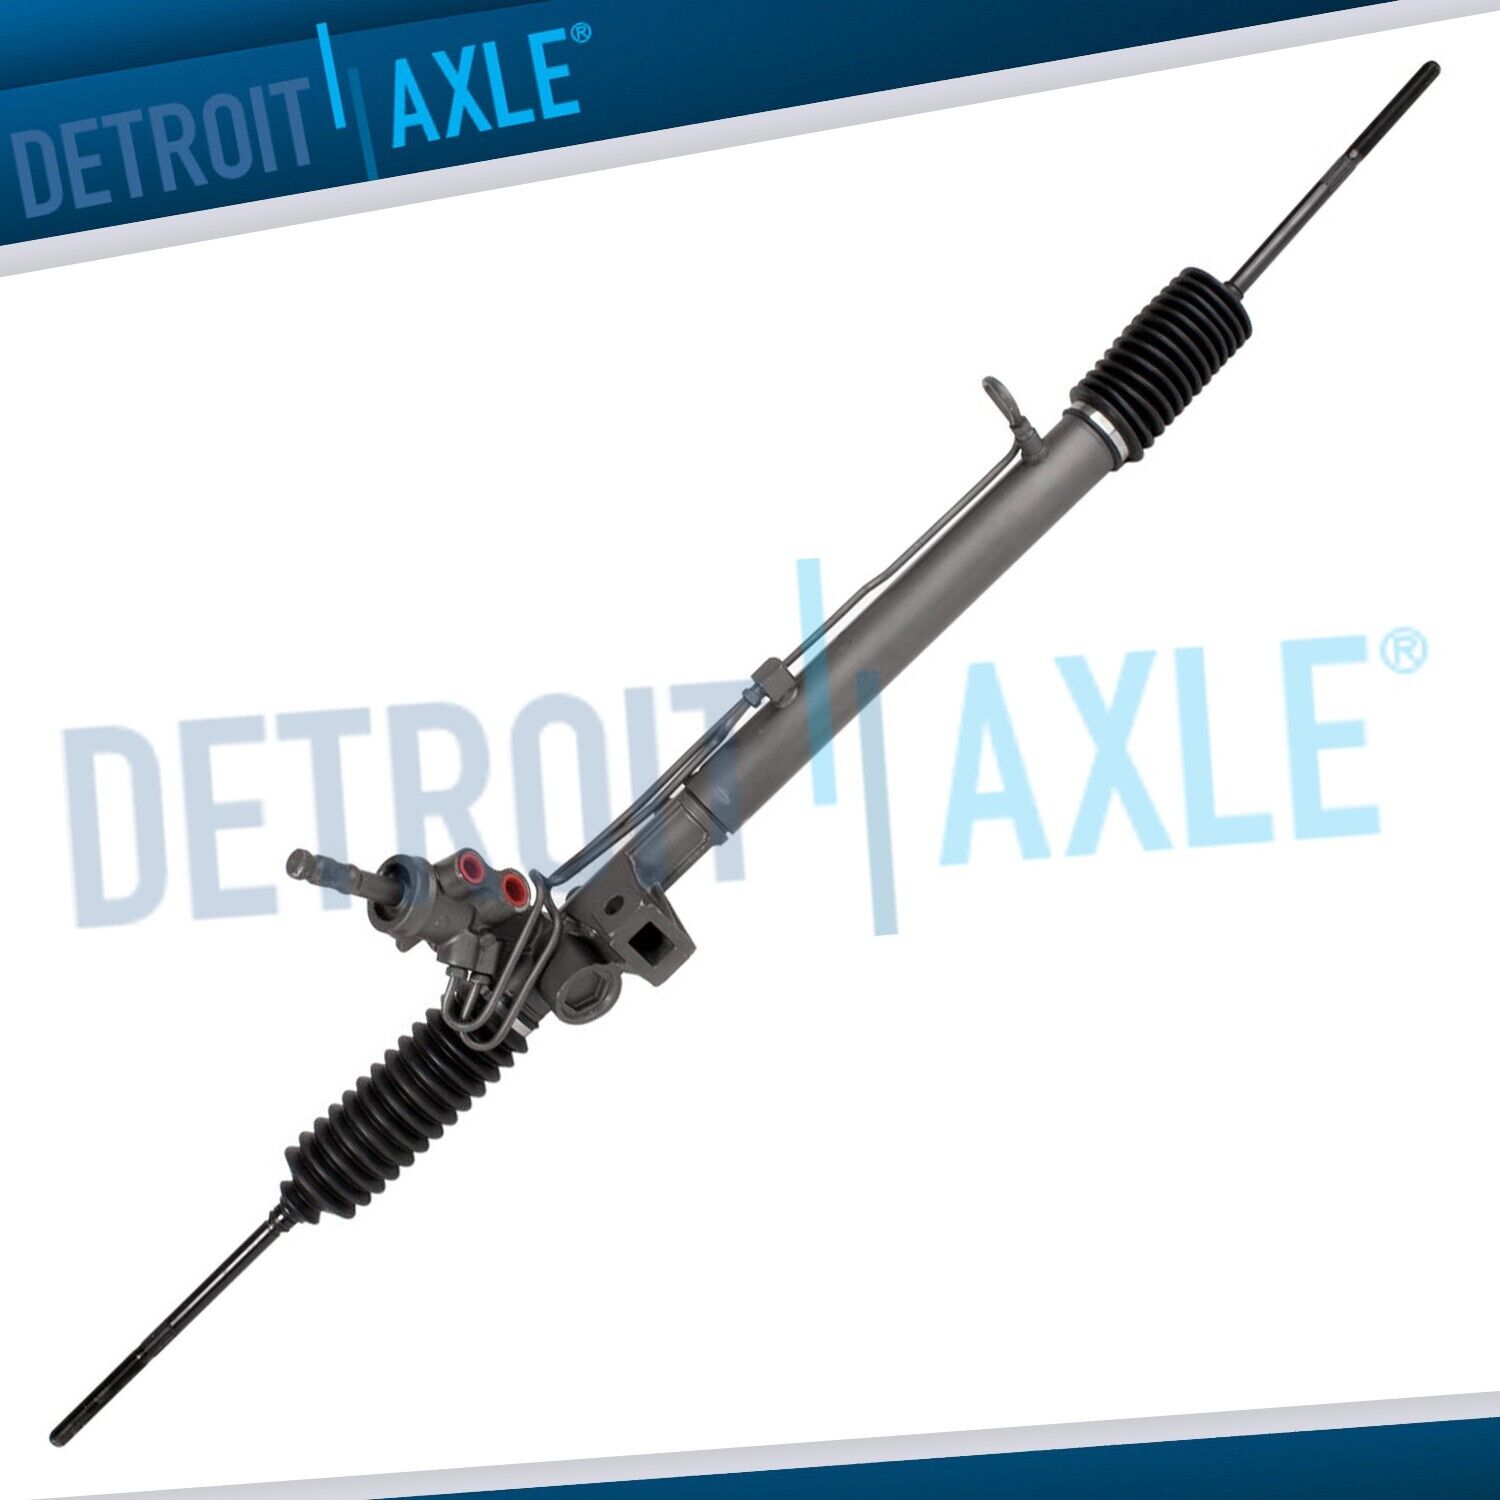 Power Steering Rack & Pinion for 1996 - 1998 1999 2000 Dodge Chrysler Plymouth